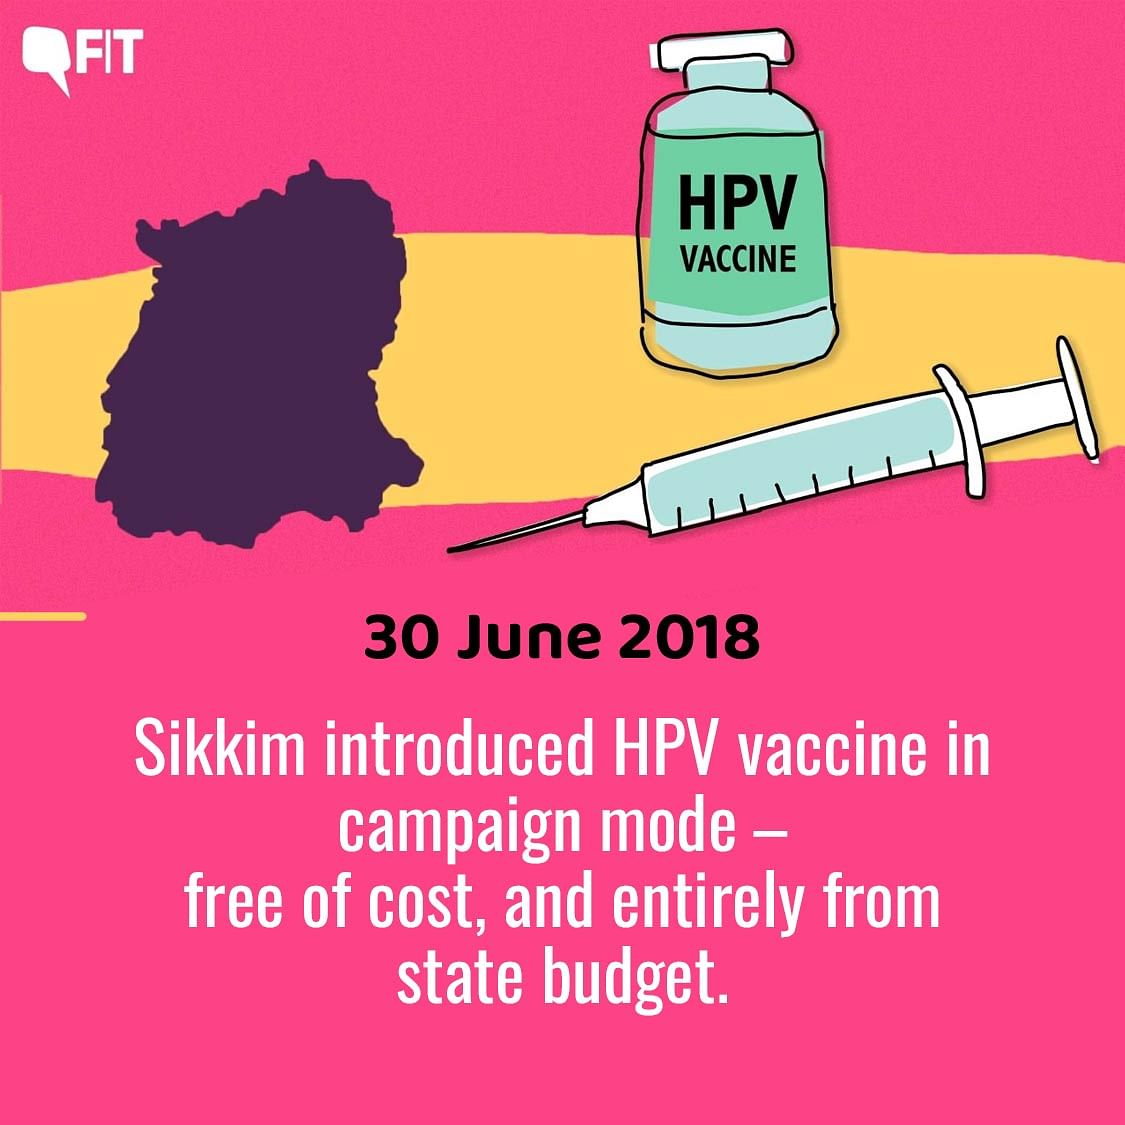 Cervical Cancer Awareness Month: More so, how did Sikkim convince parents of girls to take the HPV vaccine?